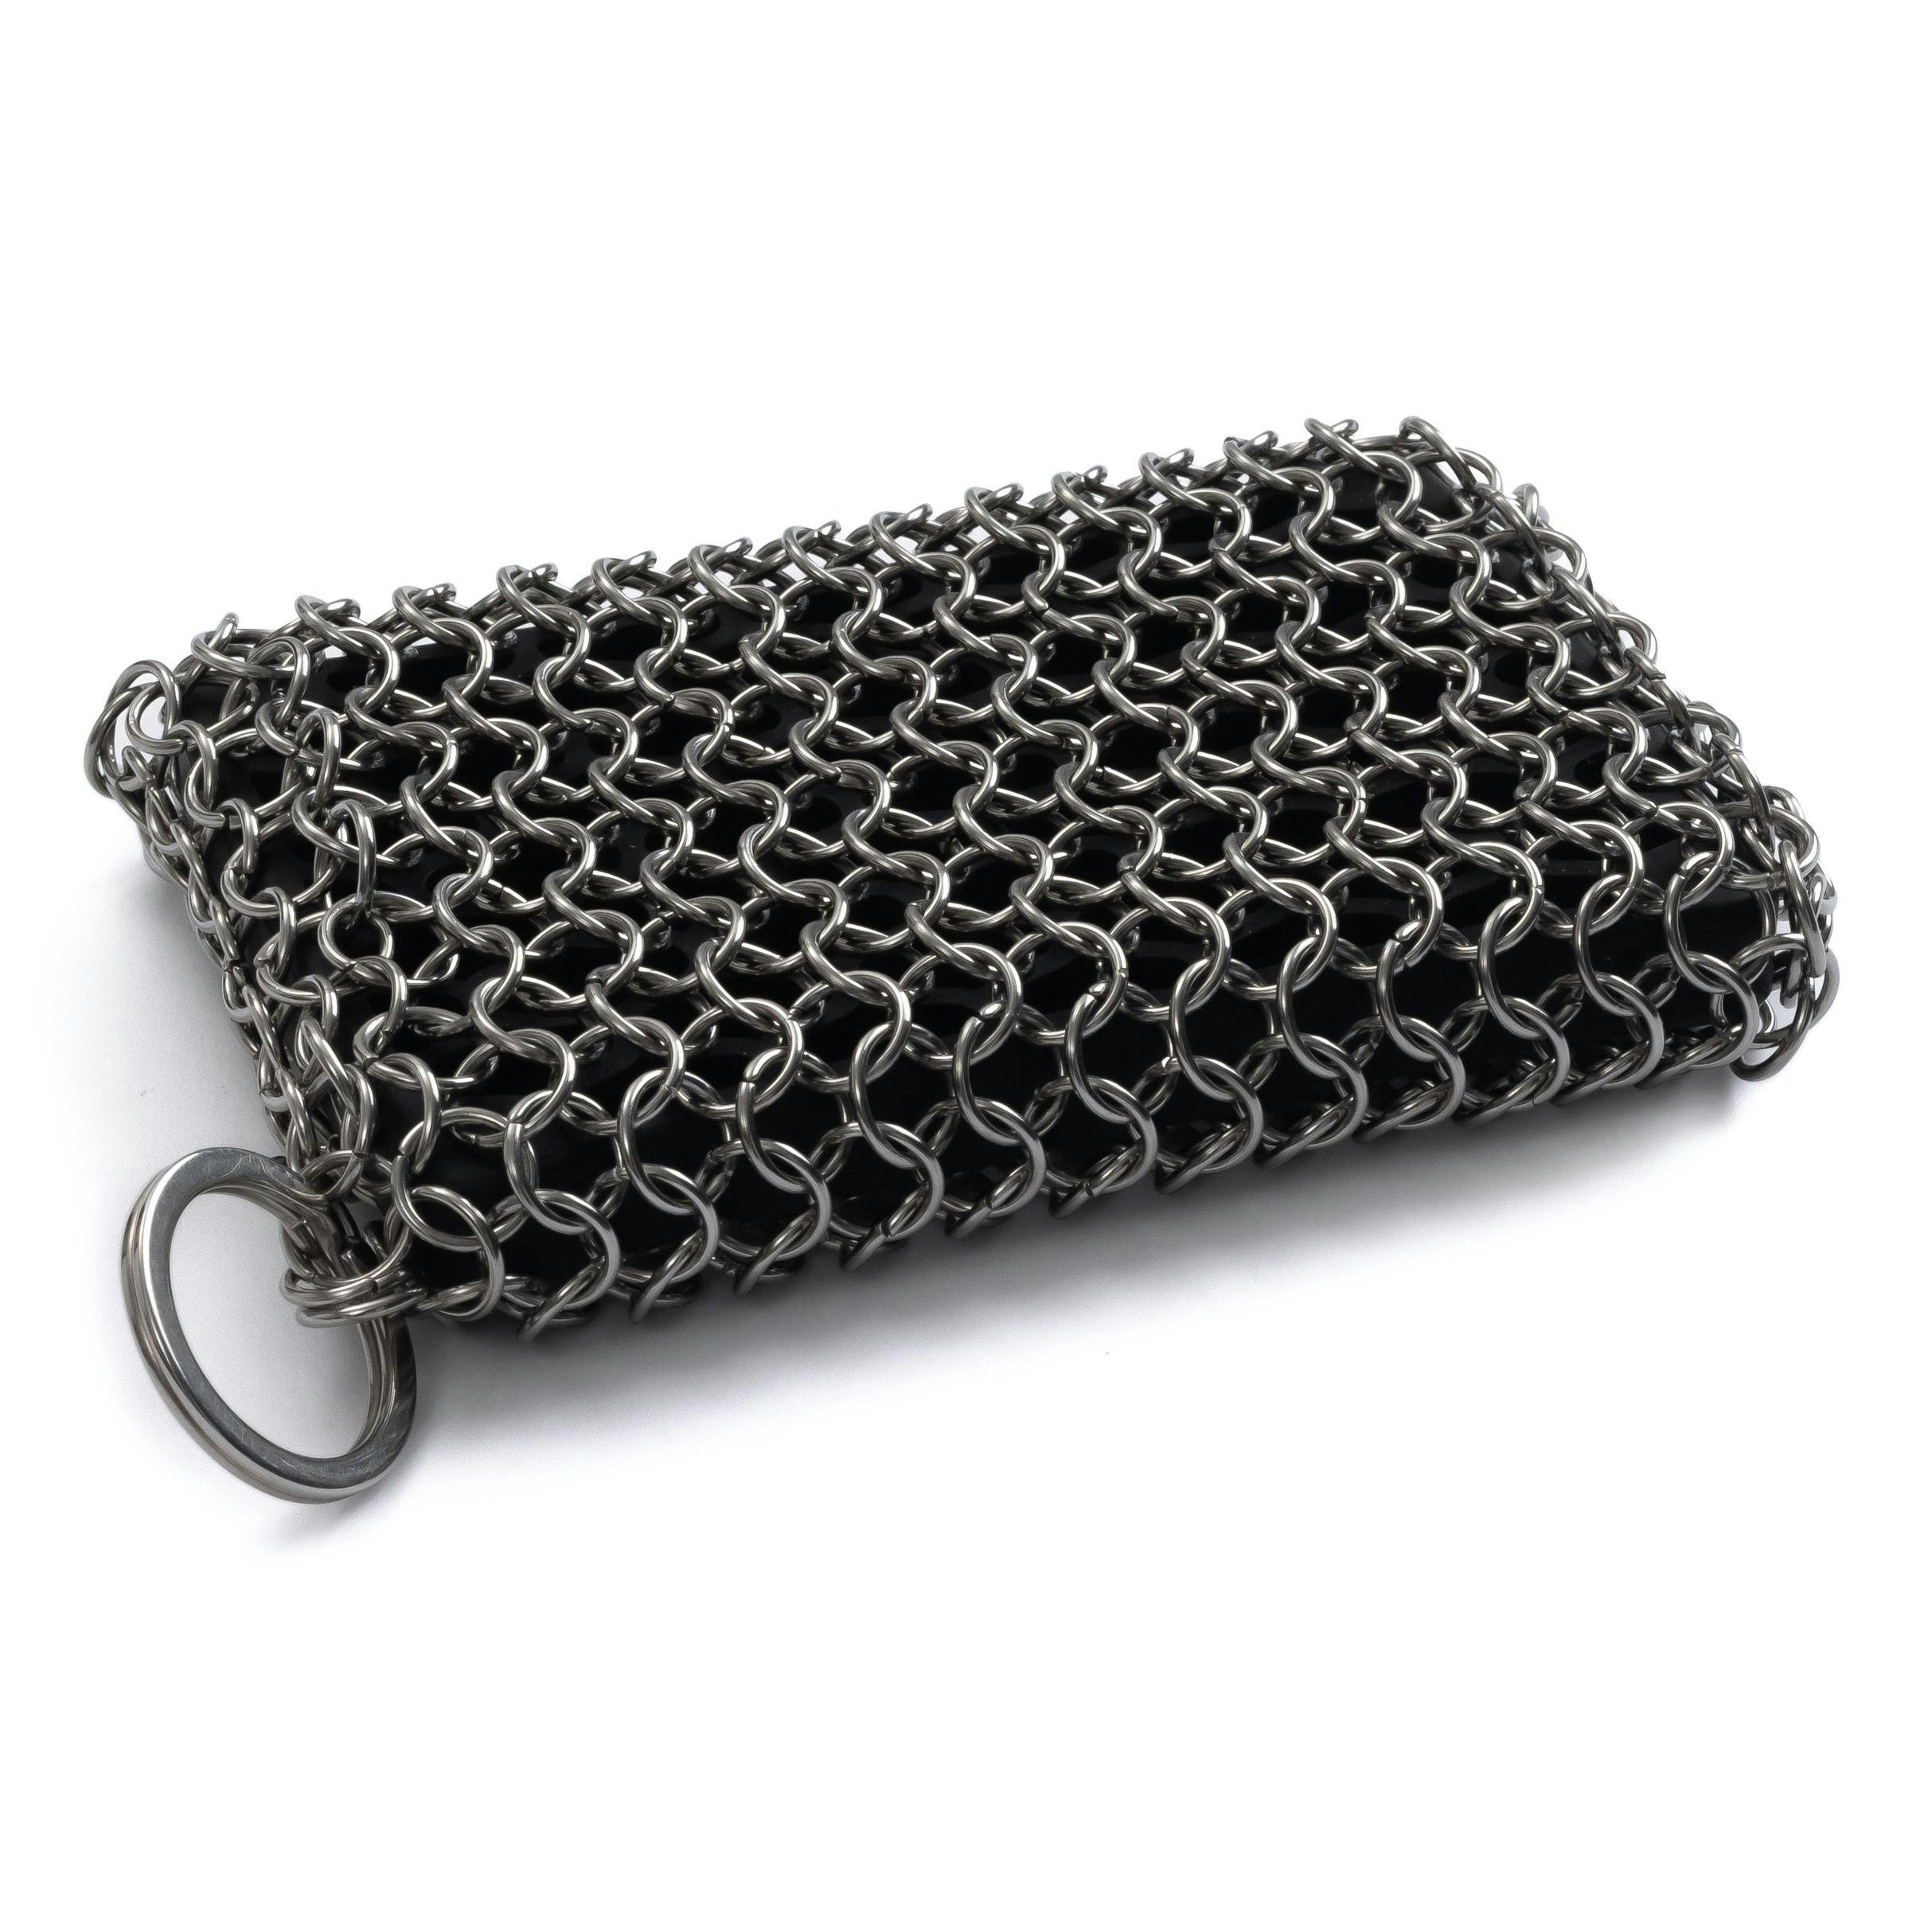 Barebones Stainless Steel Cleaning Mesh Scrubber